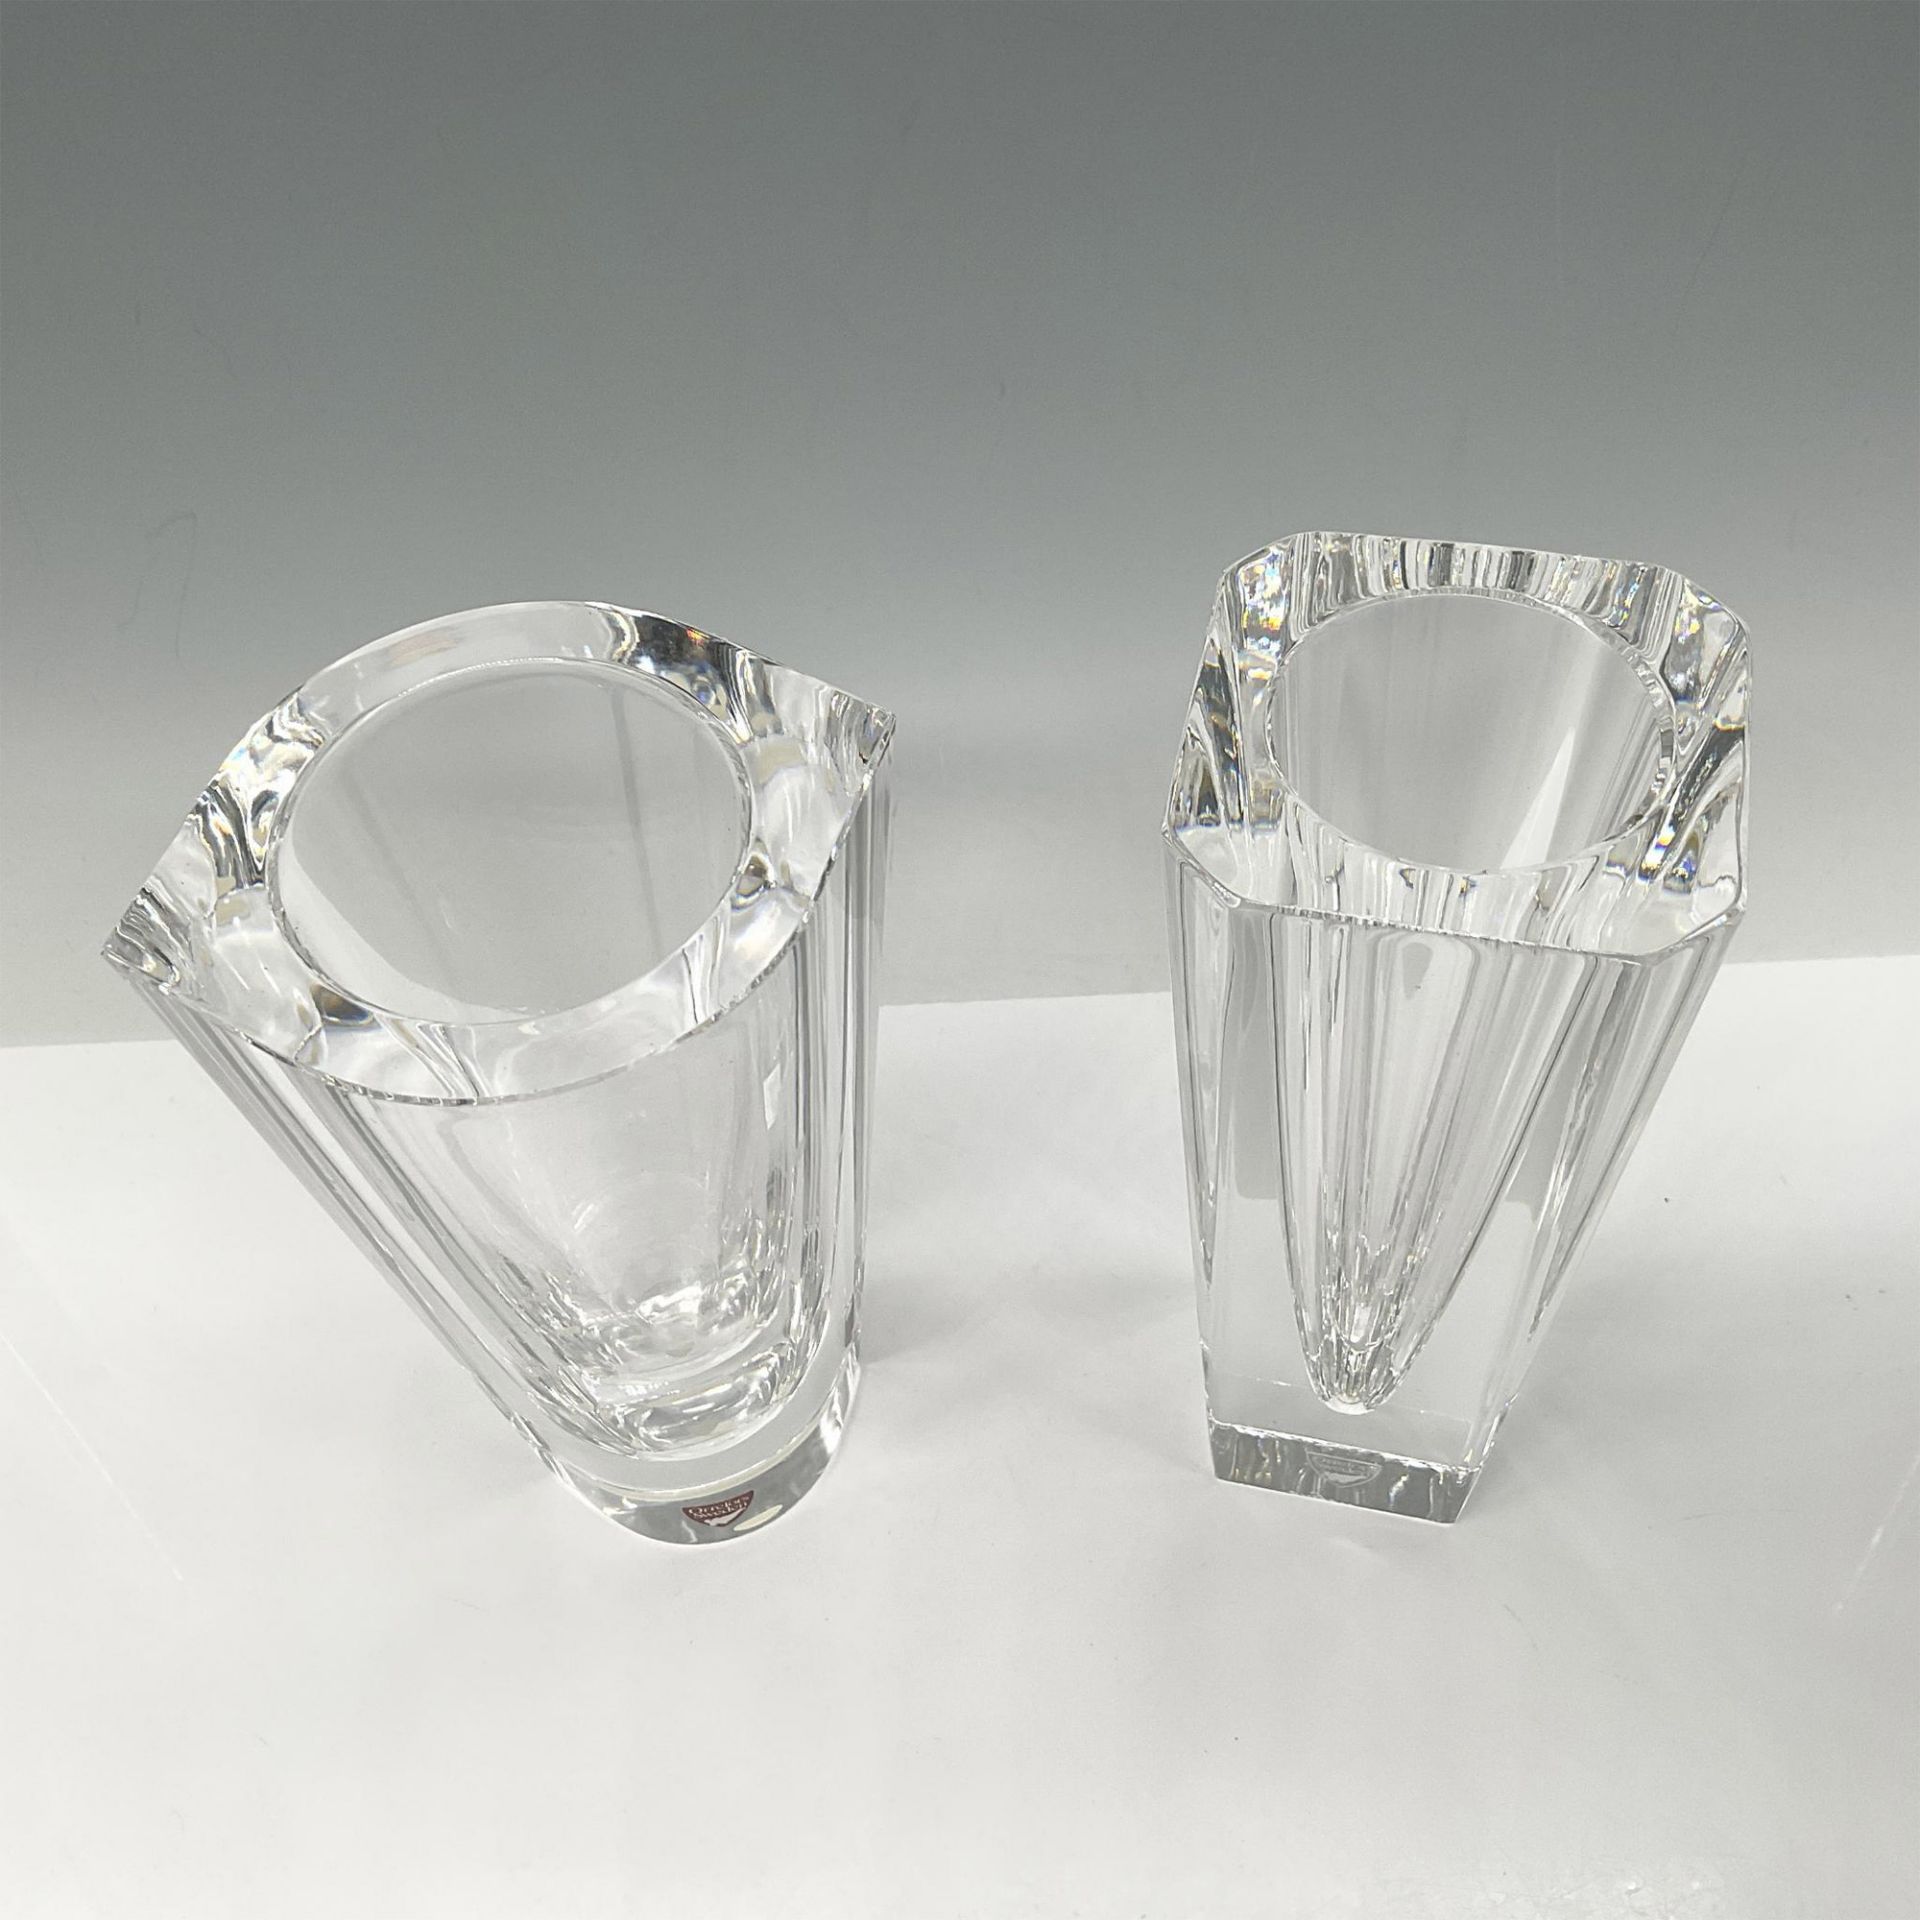 2pc Orrefors Crystal Vases - Image 2 of 4